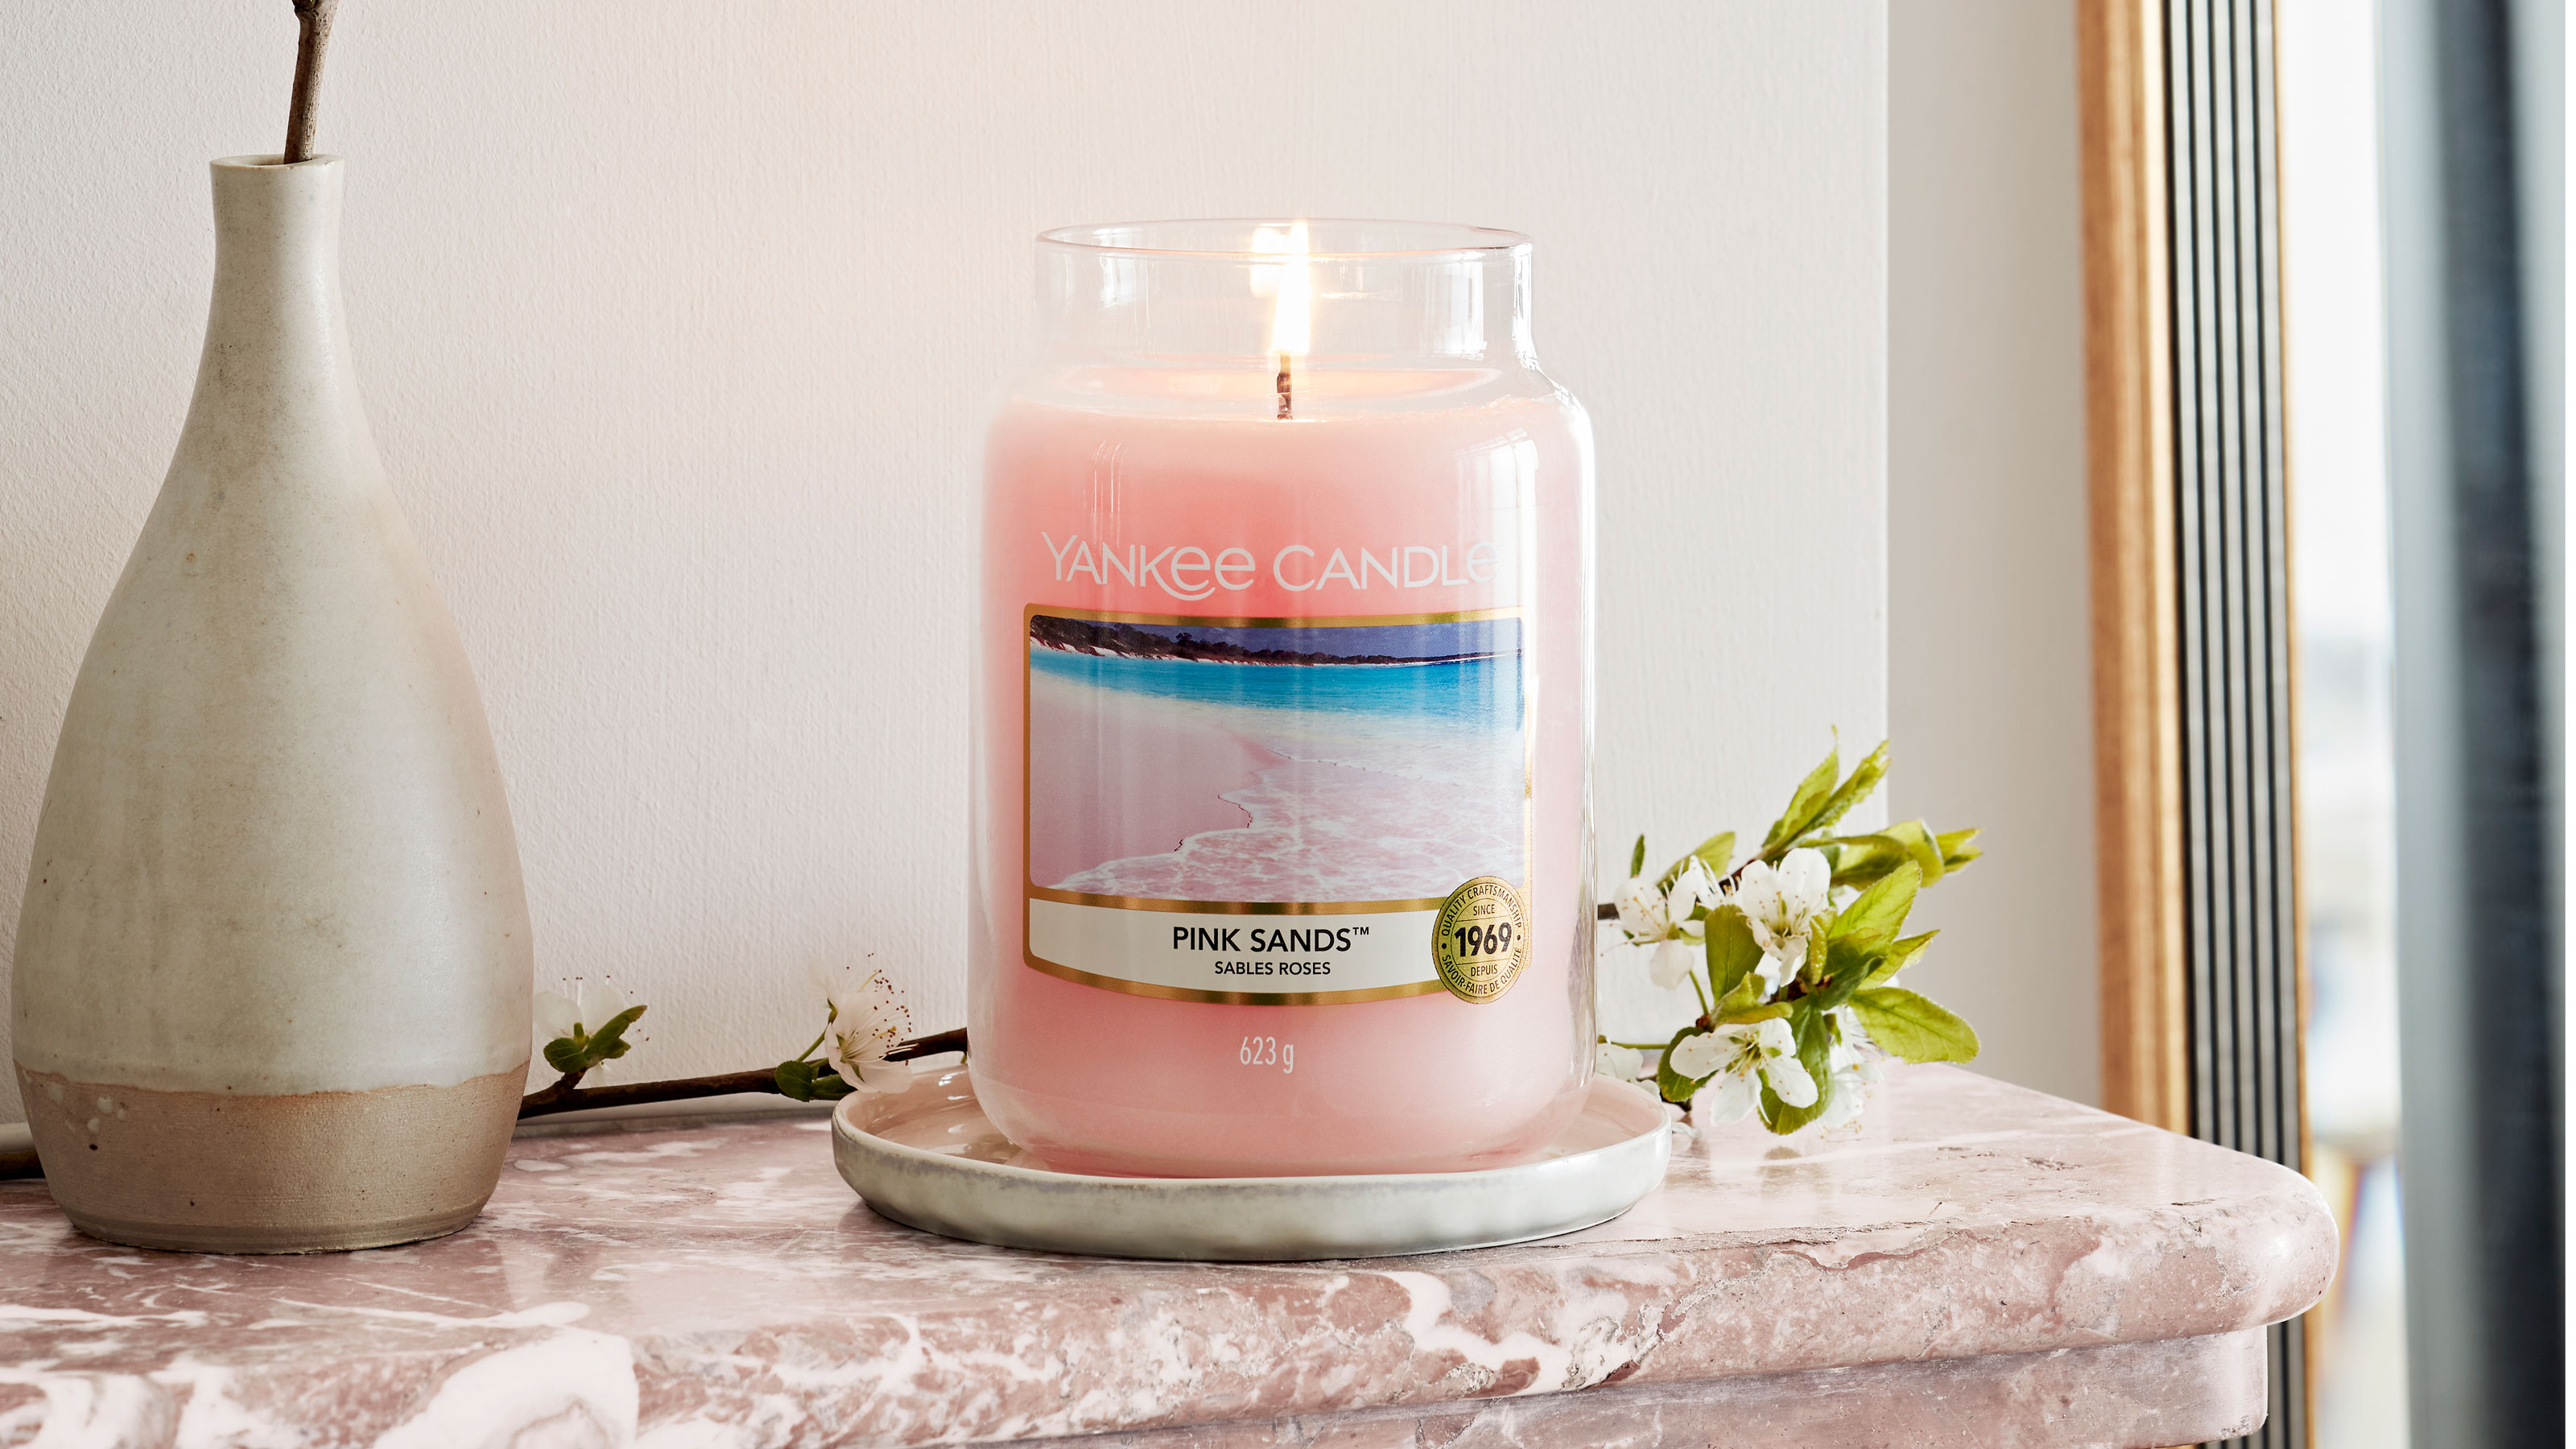 Yankee Candle fragrance expert shares easy candle-burning tip